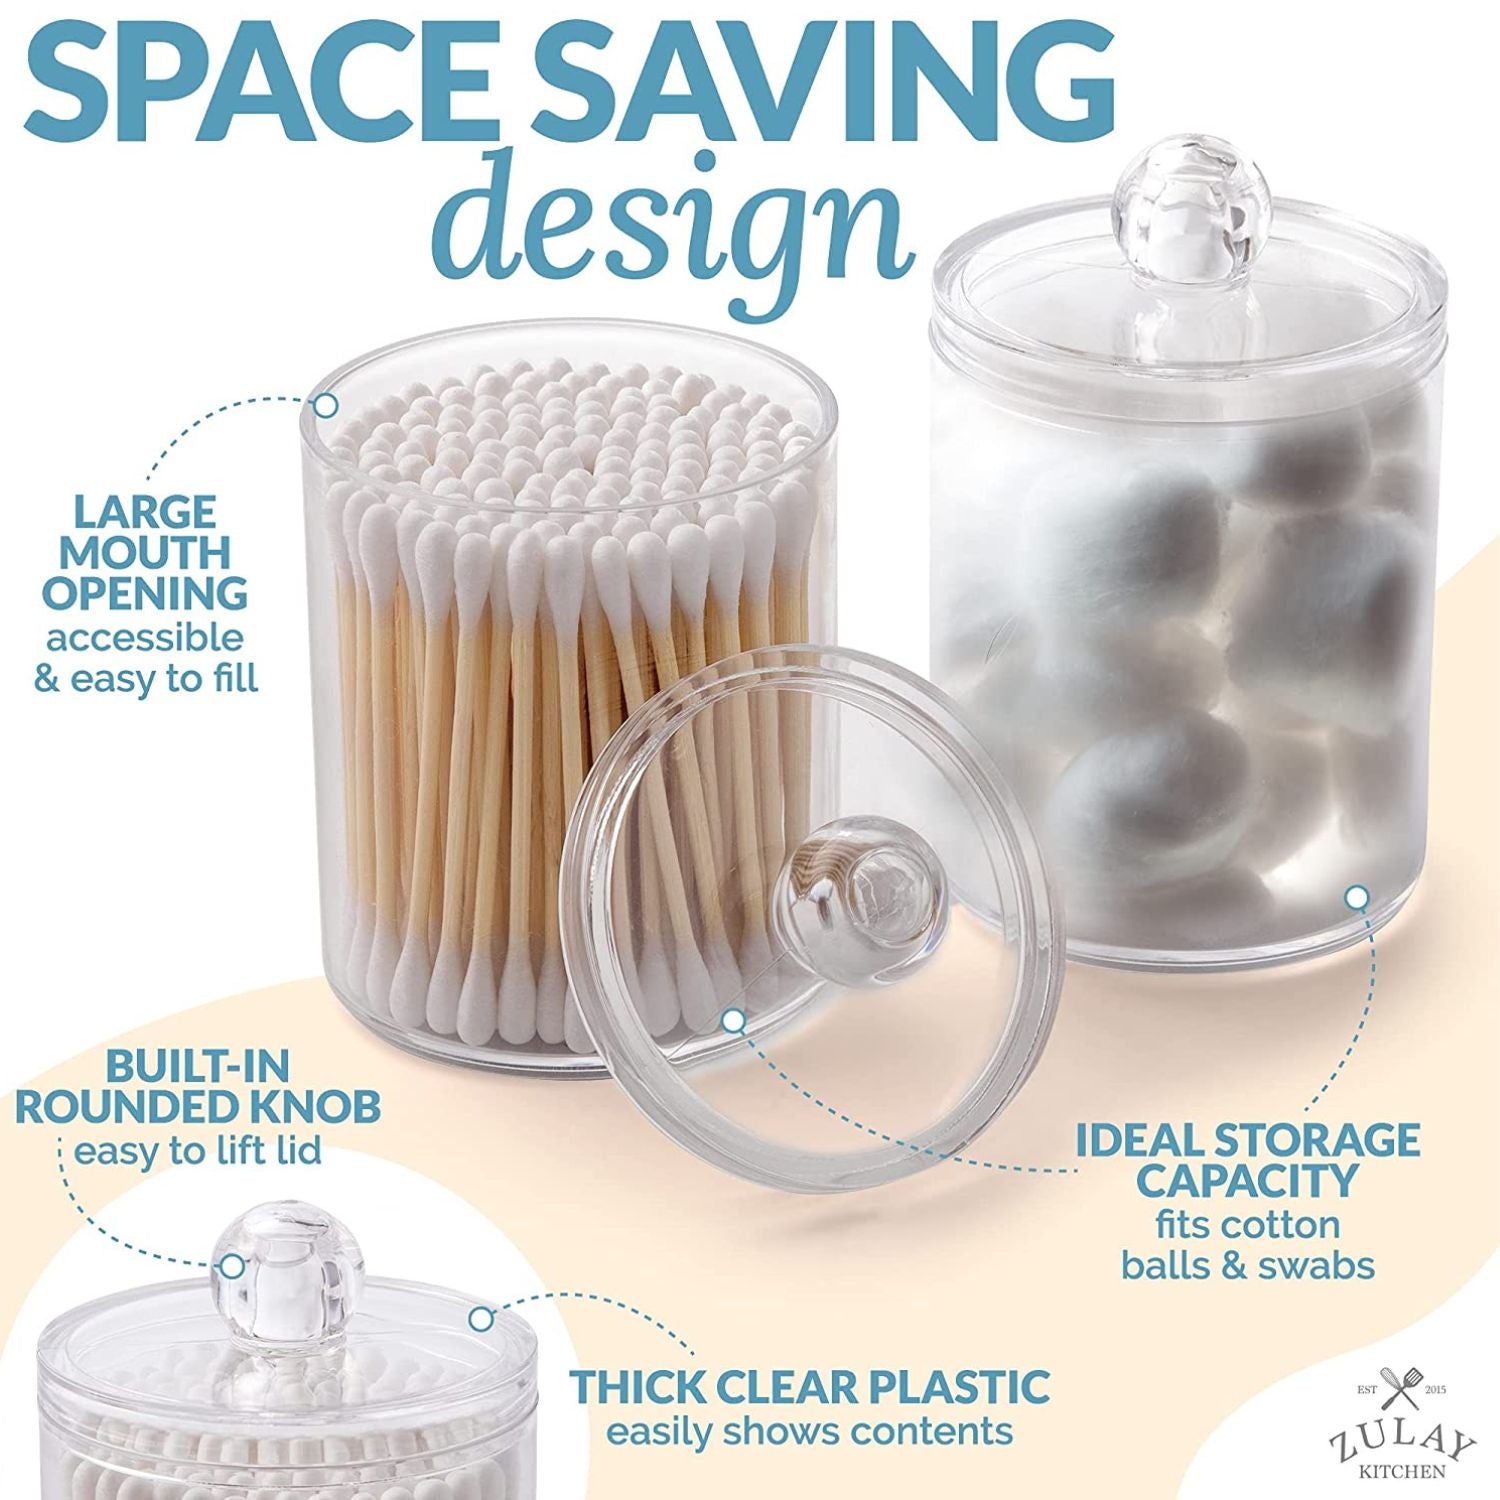 Zulay Home Qtip Holder Bathroom Canisters - 20oz